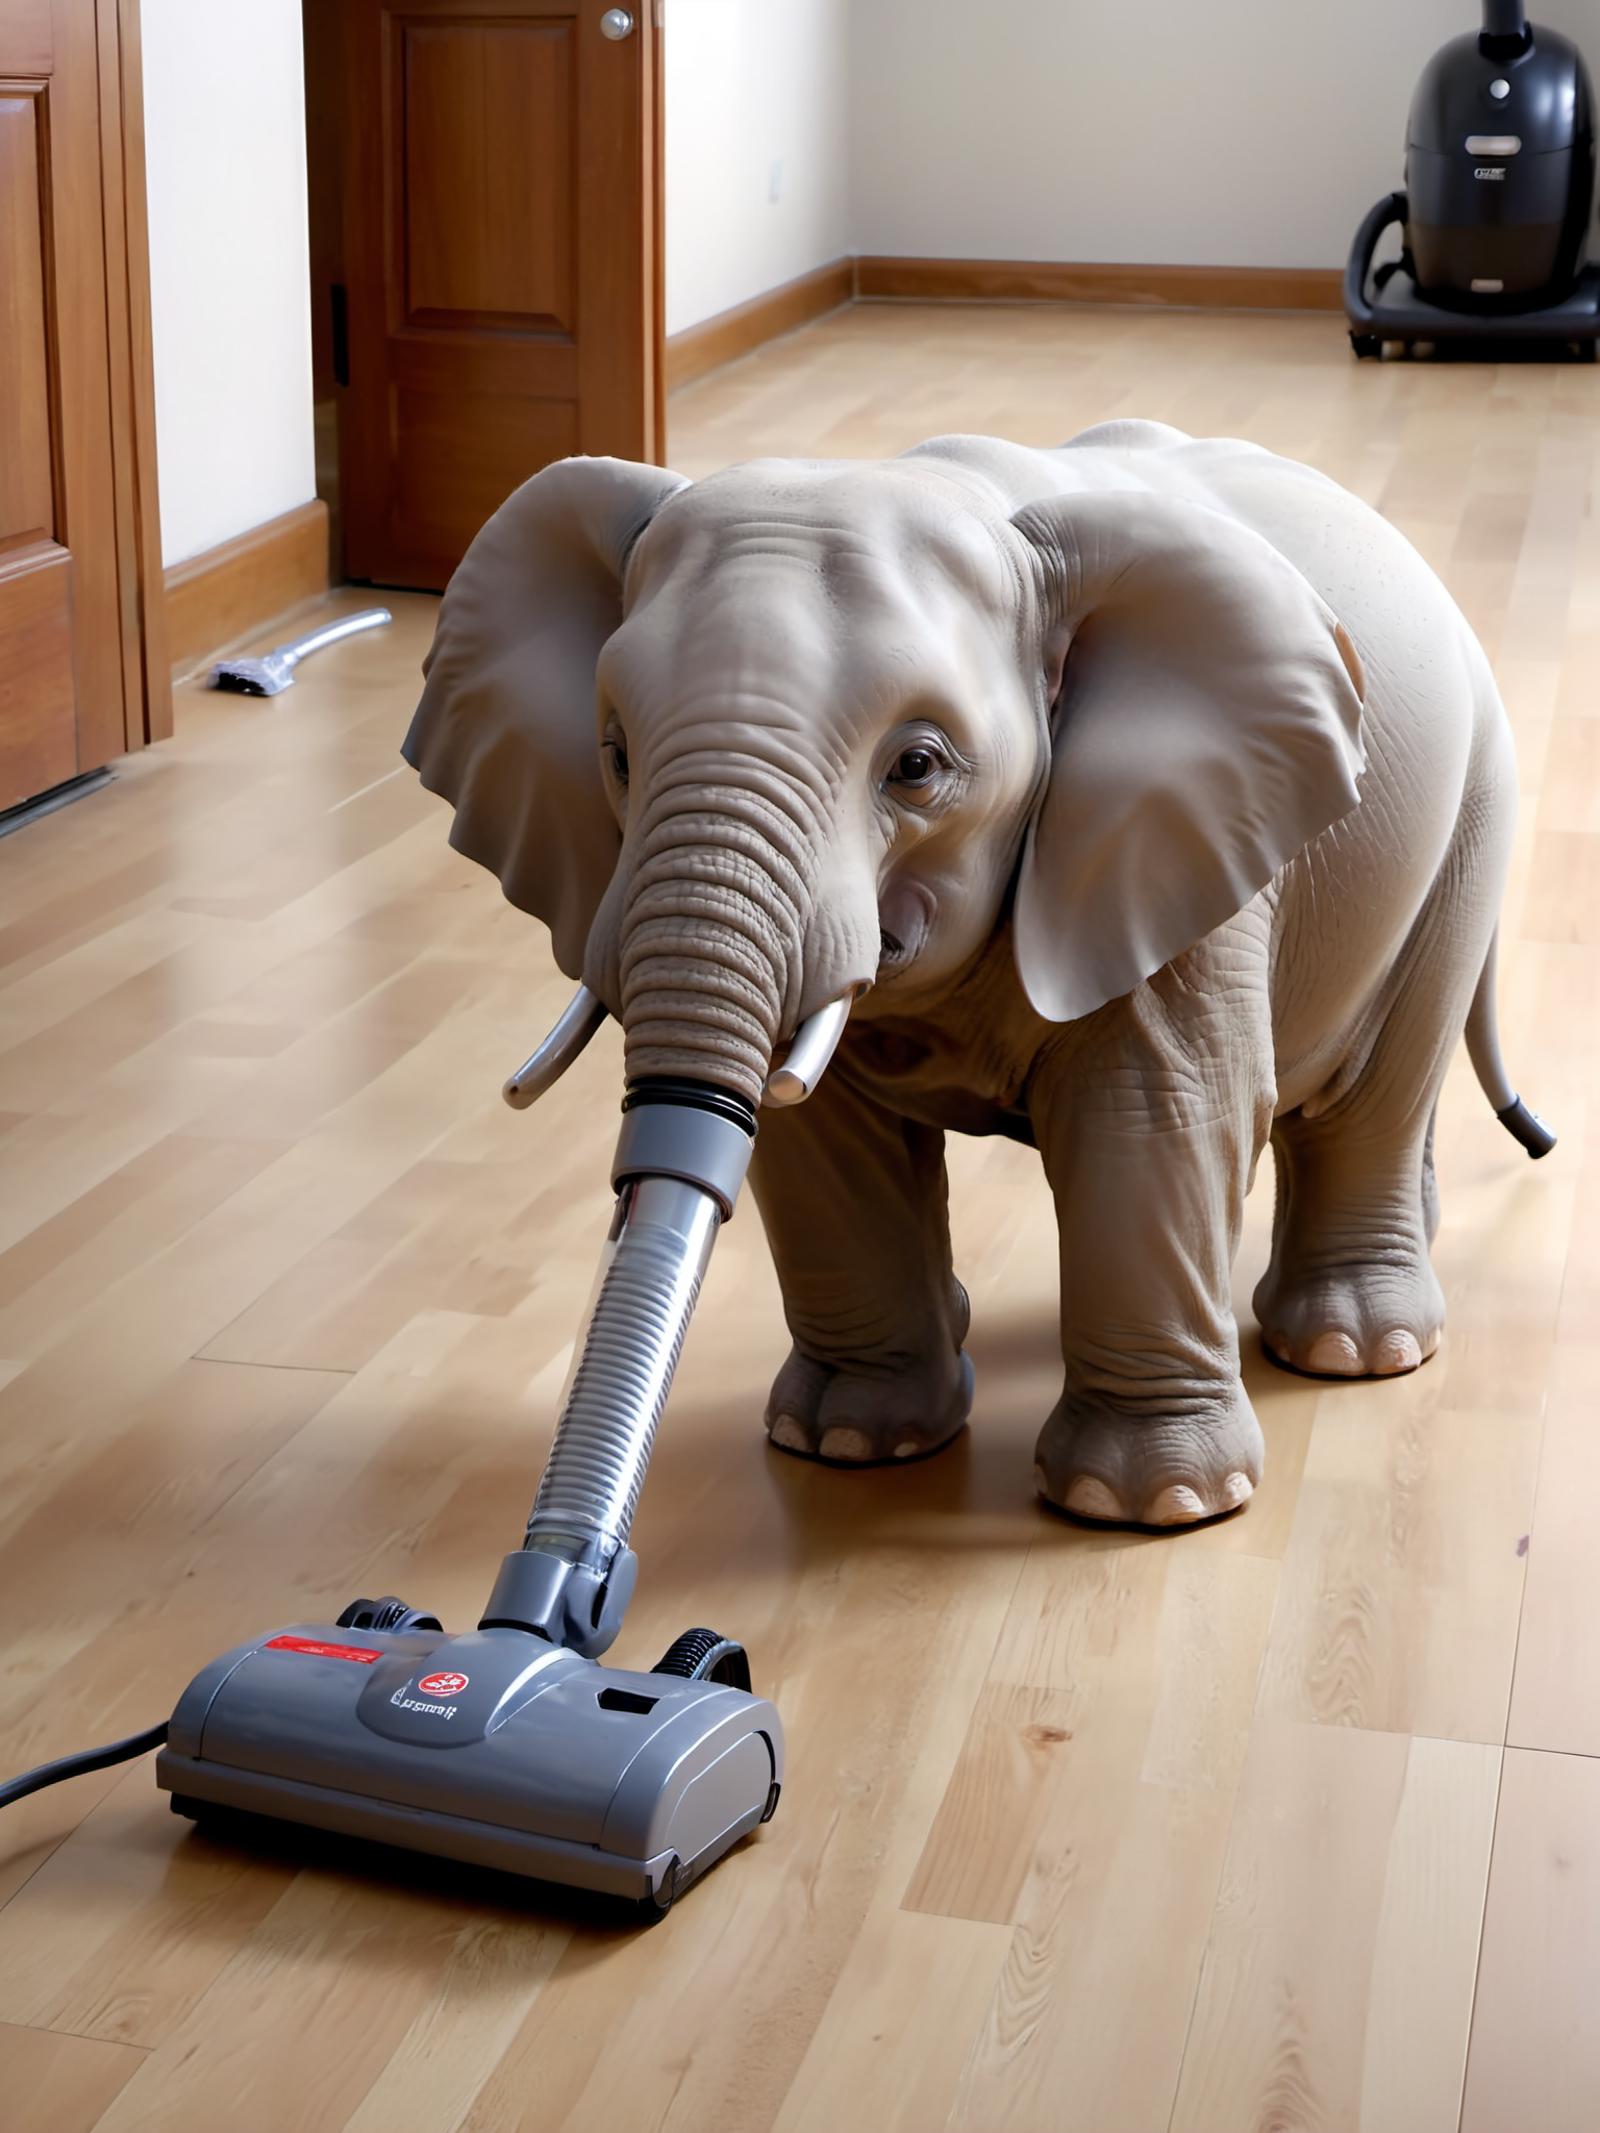 A baby elephant using a vacuum cleaner to clean the floor.